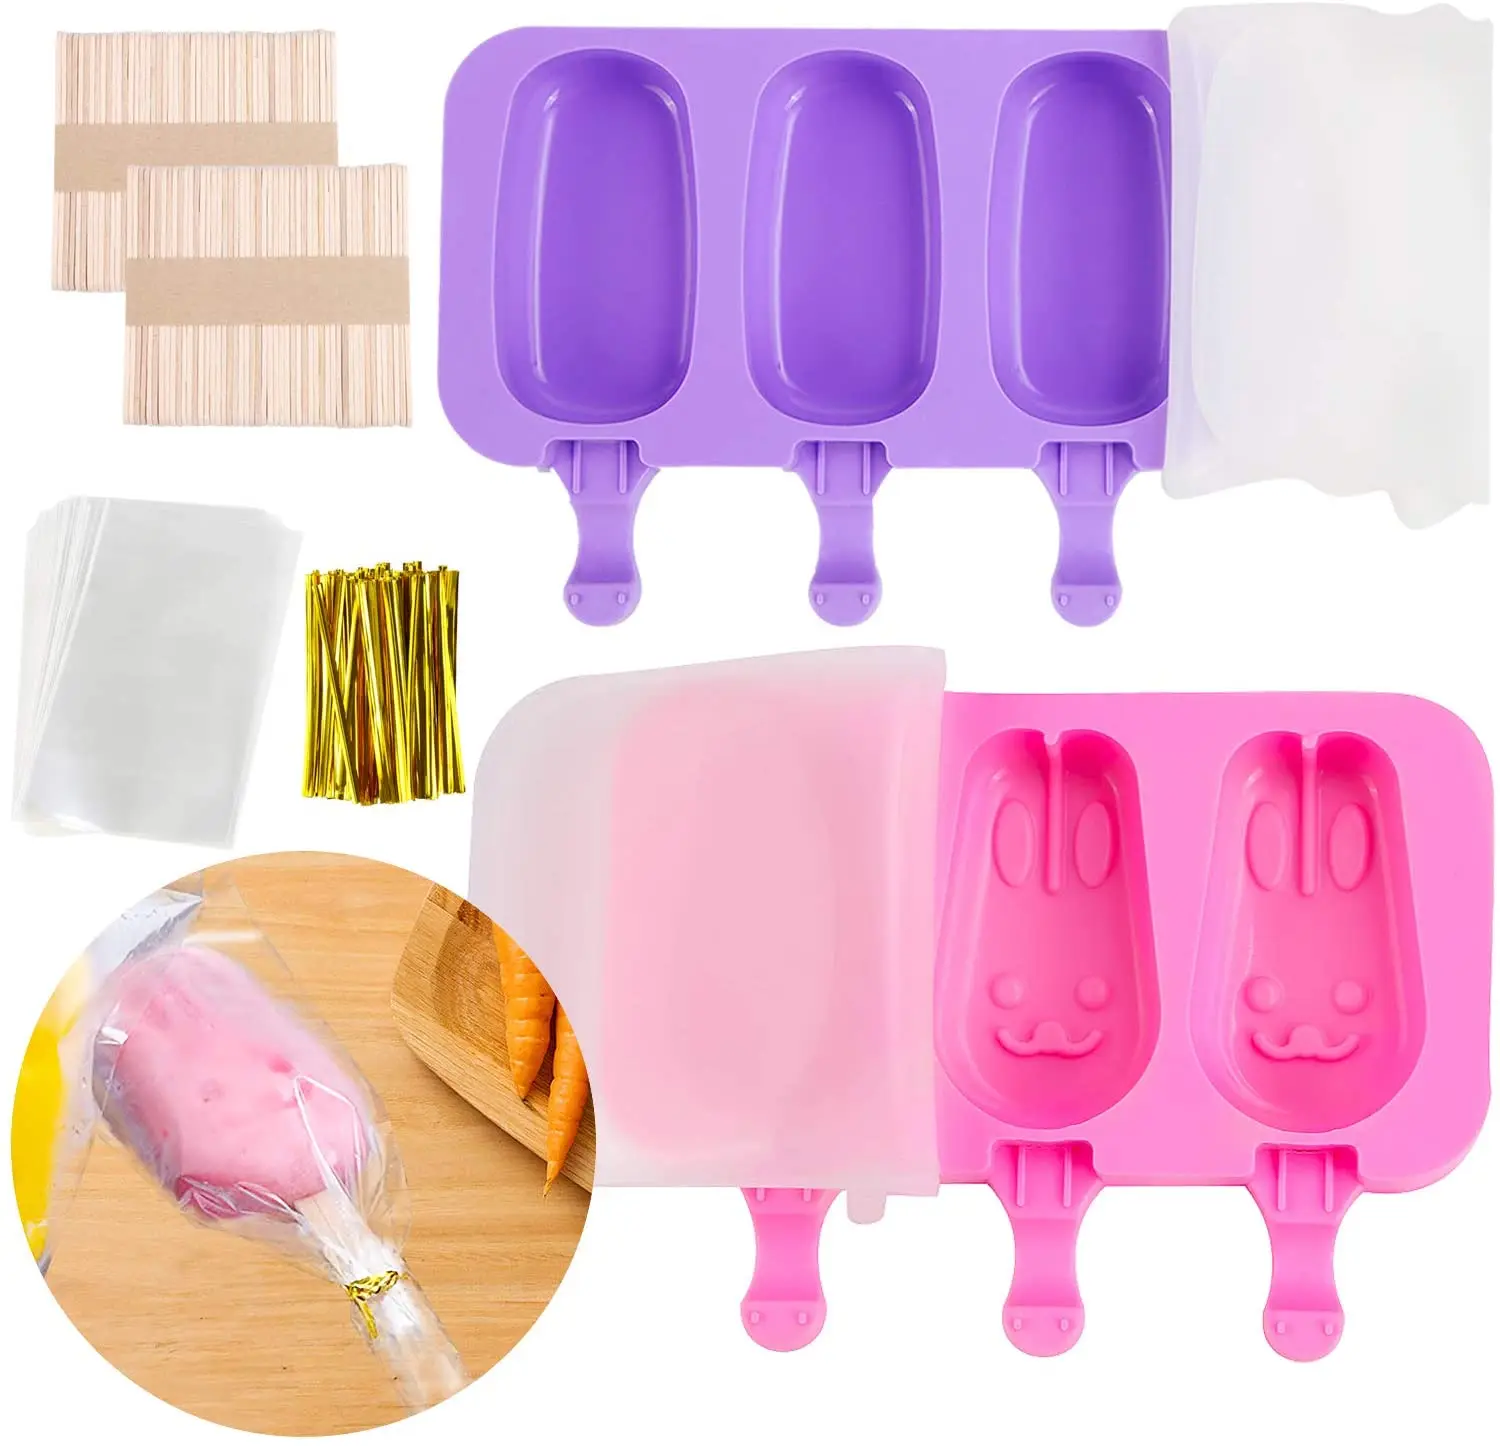 

Silicone Popsicle Molds Creative Cartoon Posicle Mold with Lid for Diy Ice Popsicle Ice Cream 3 Cavities Homemade Ice Pop Molds